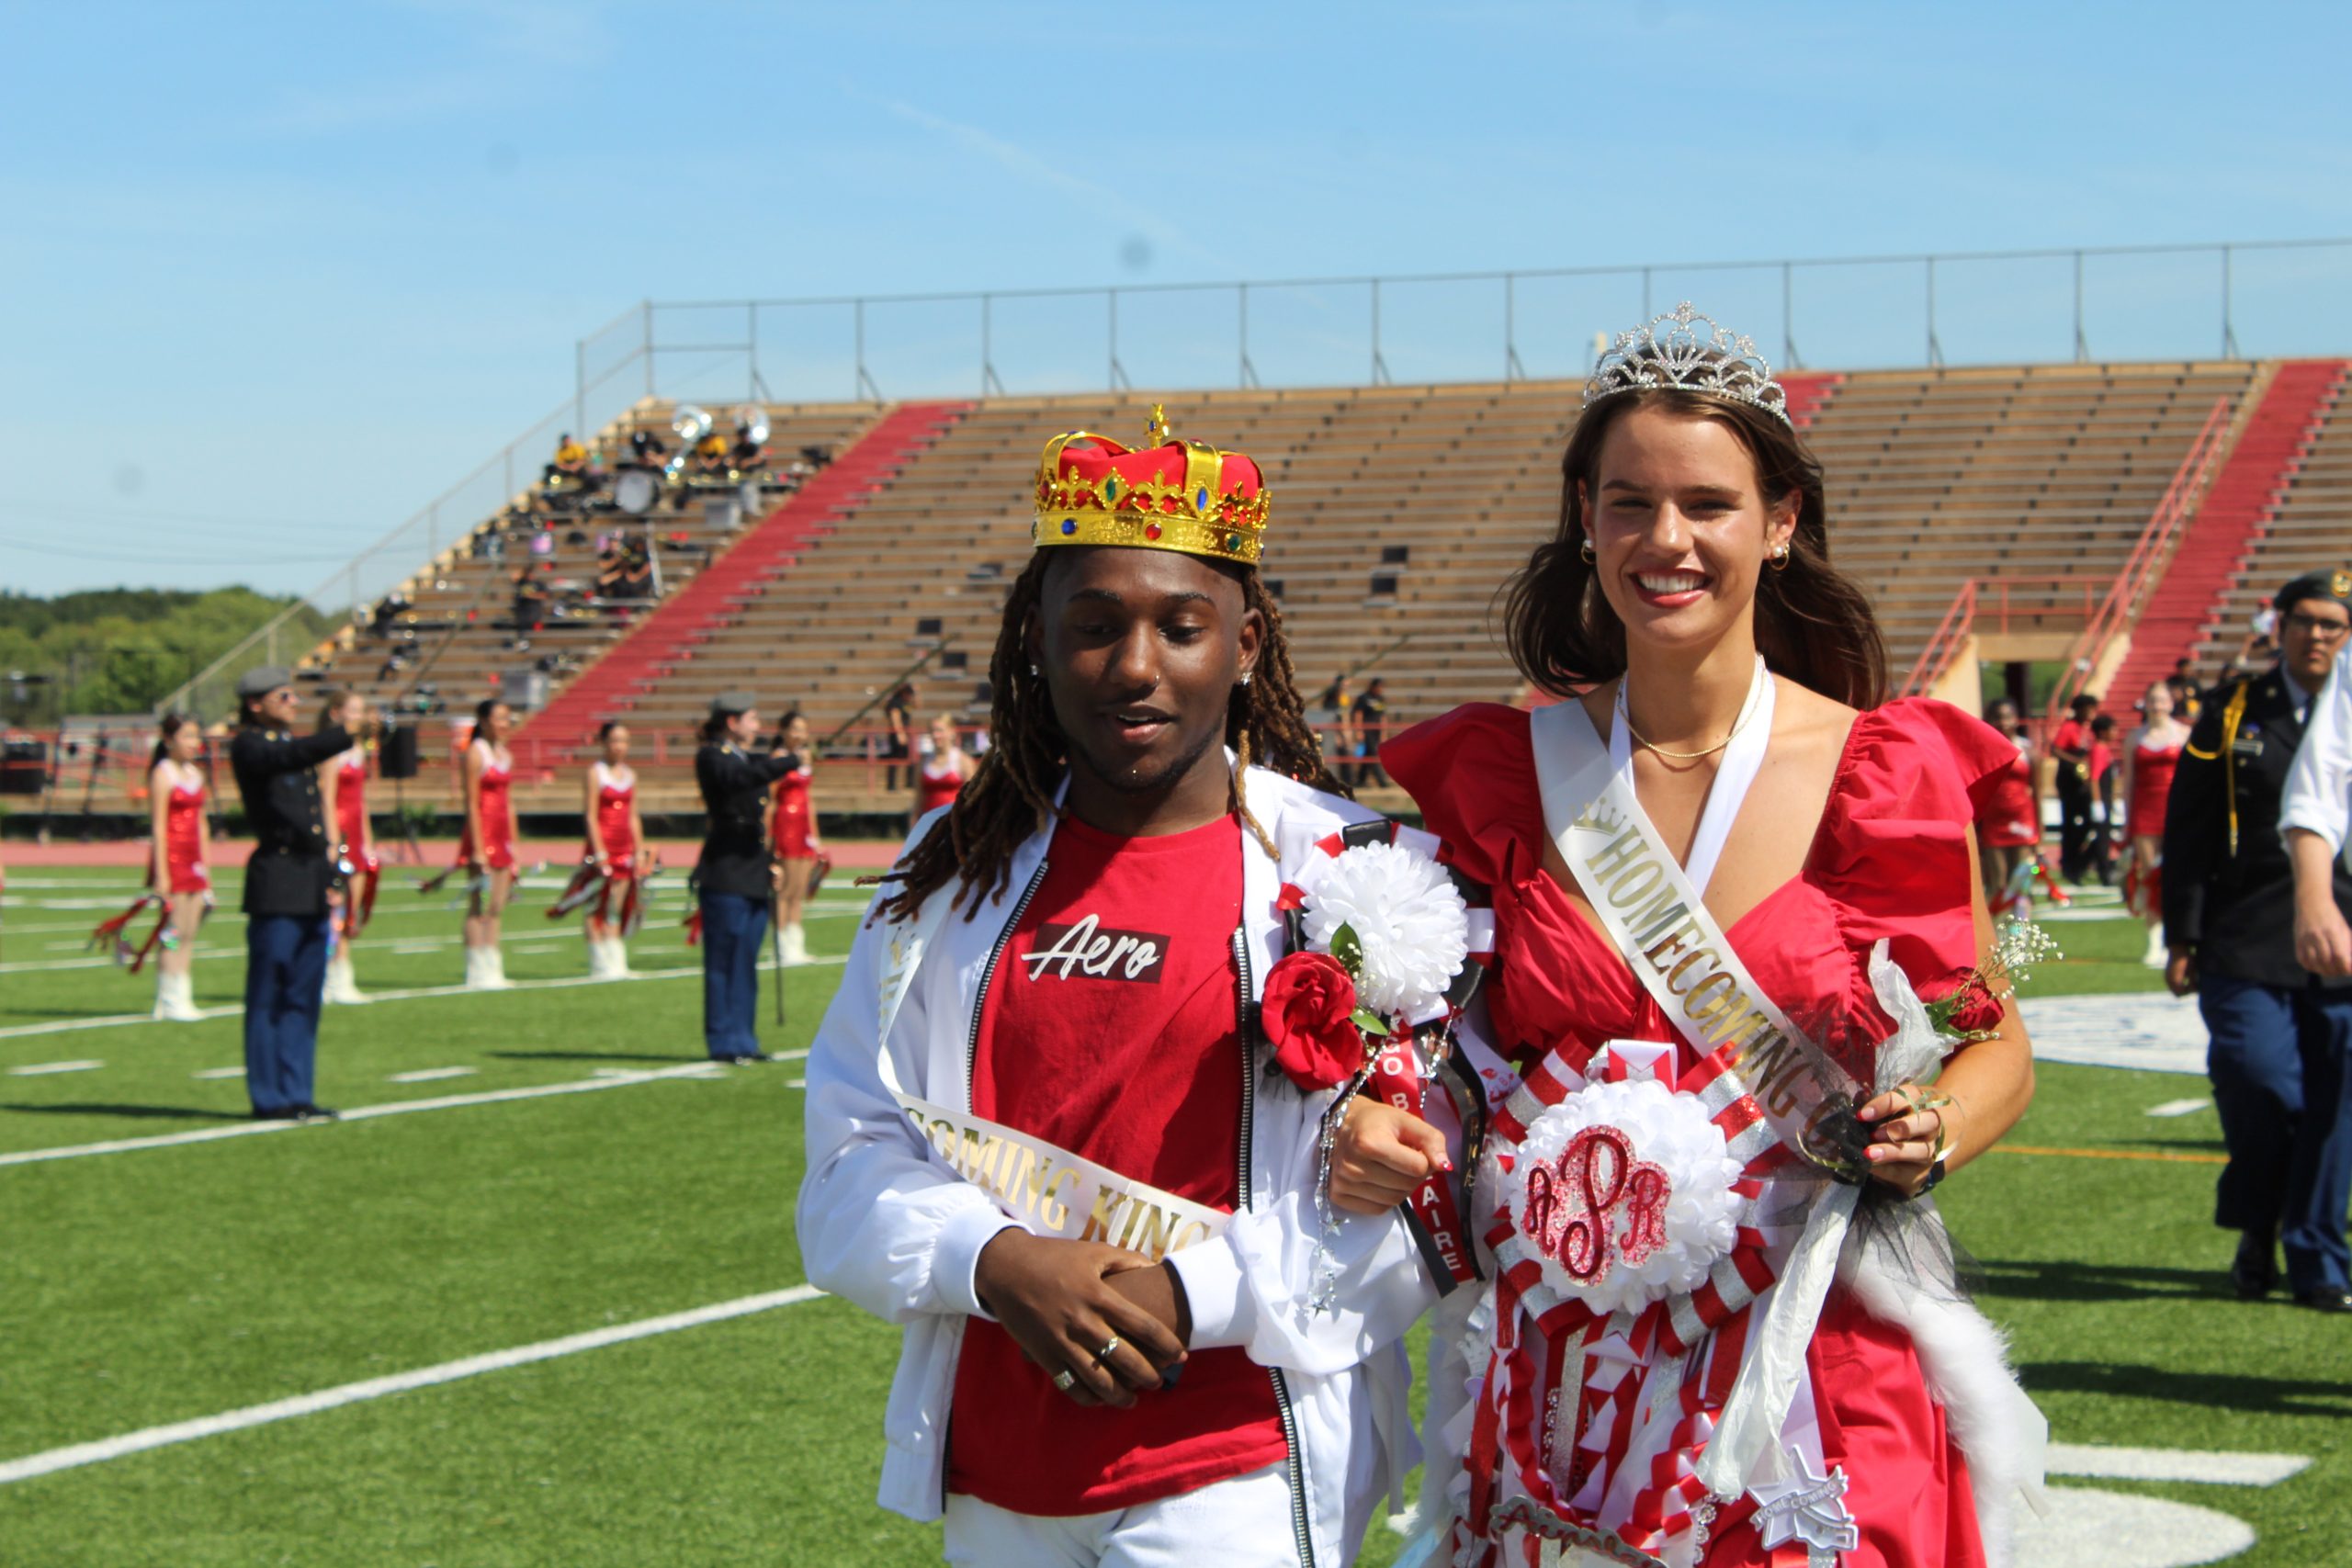 Senior Ainsley Pinkerton walks off Butler stadiums field, shocked she won homecoming Queen as the representative of softball, a team1/4 the size of the Belles, the team represented by another homecoming court nominee. Pinkerton is accompanied by Senior Jermaine Hayden, representing the fine arts and drama departments of Bellaire.